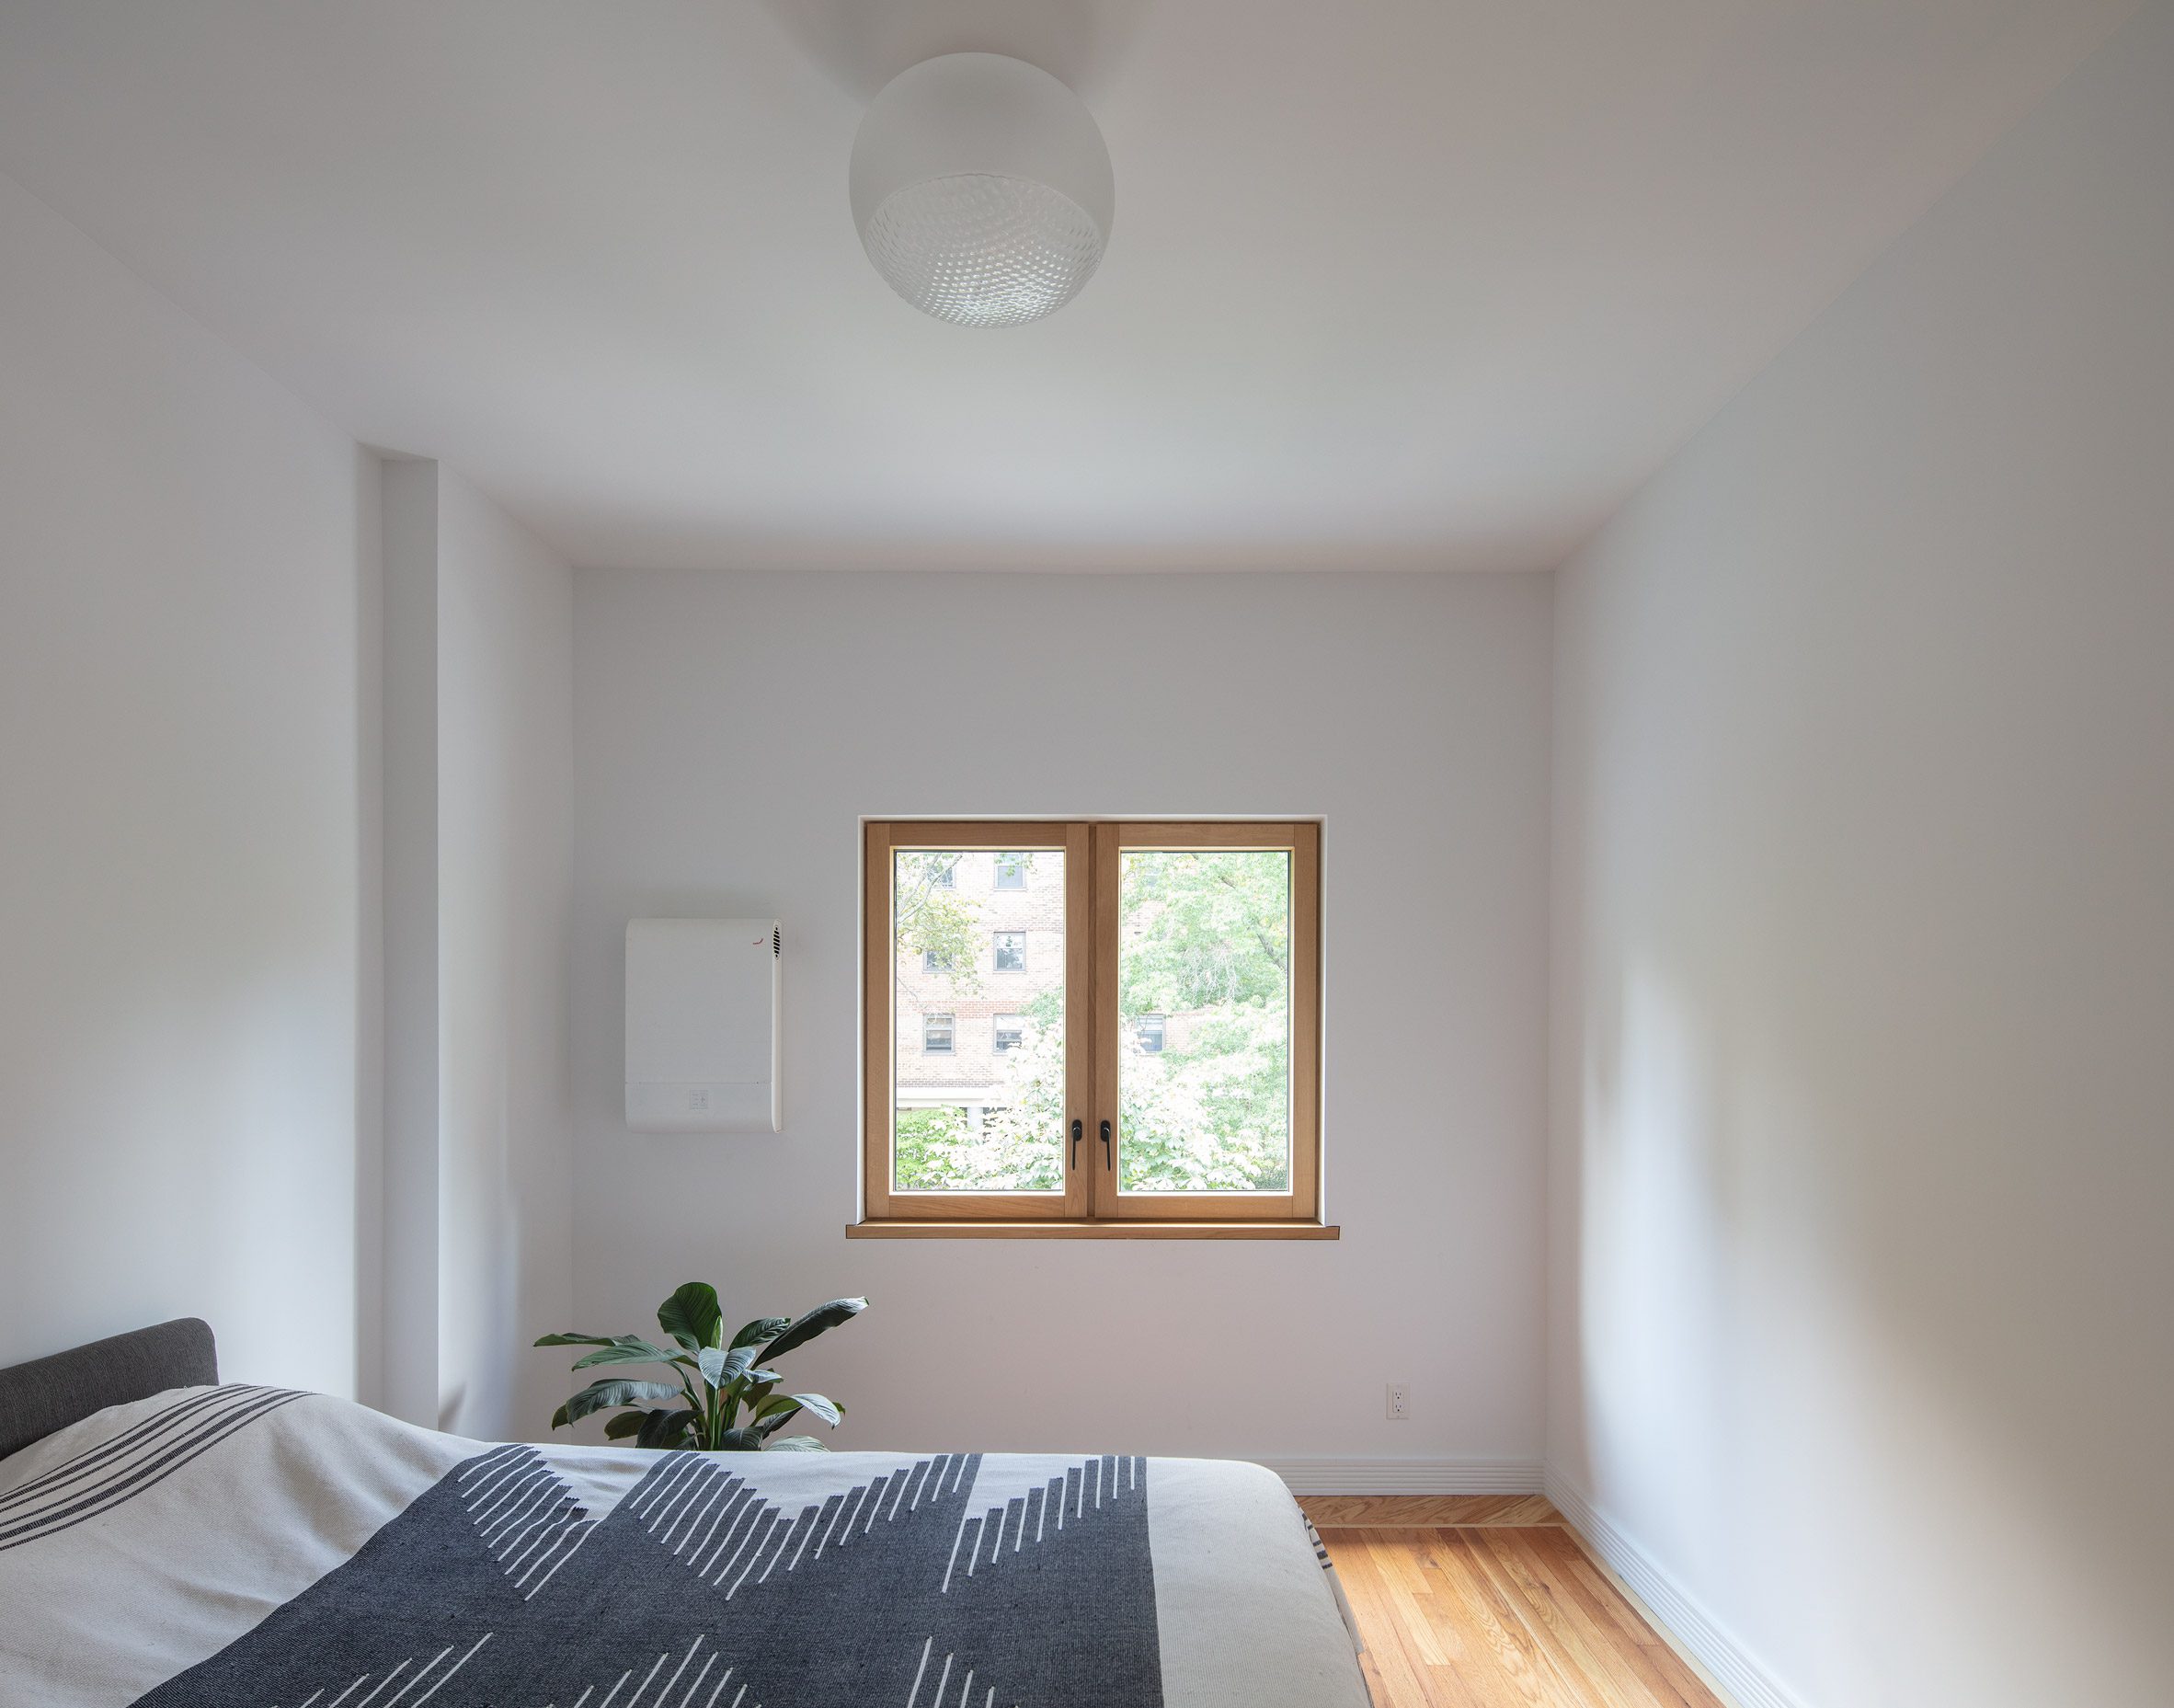 Minimal bedroom containing an energy recovery ventilator system